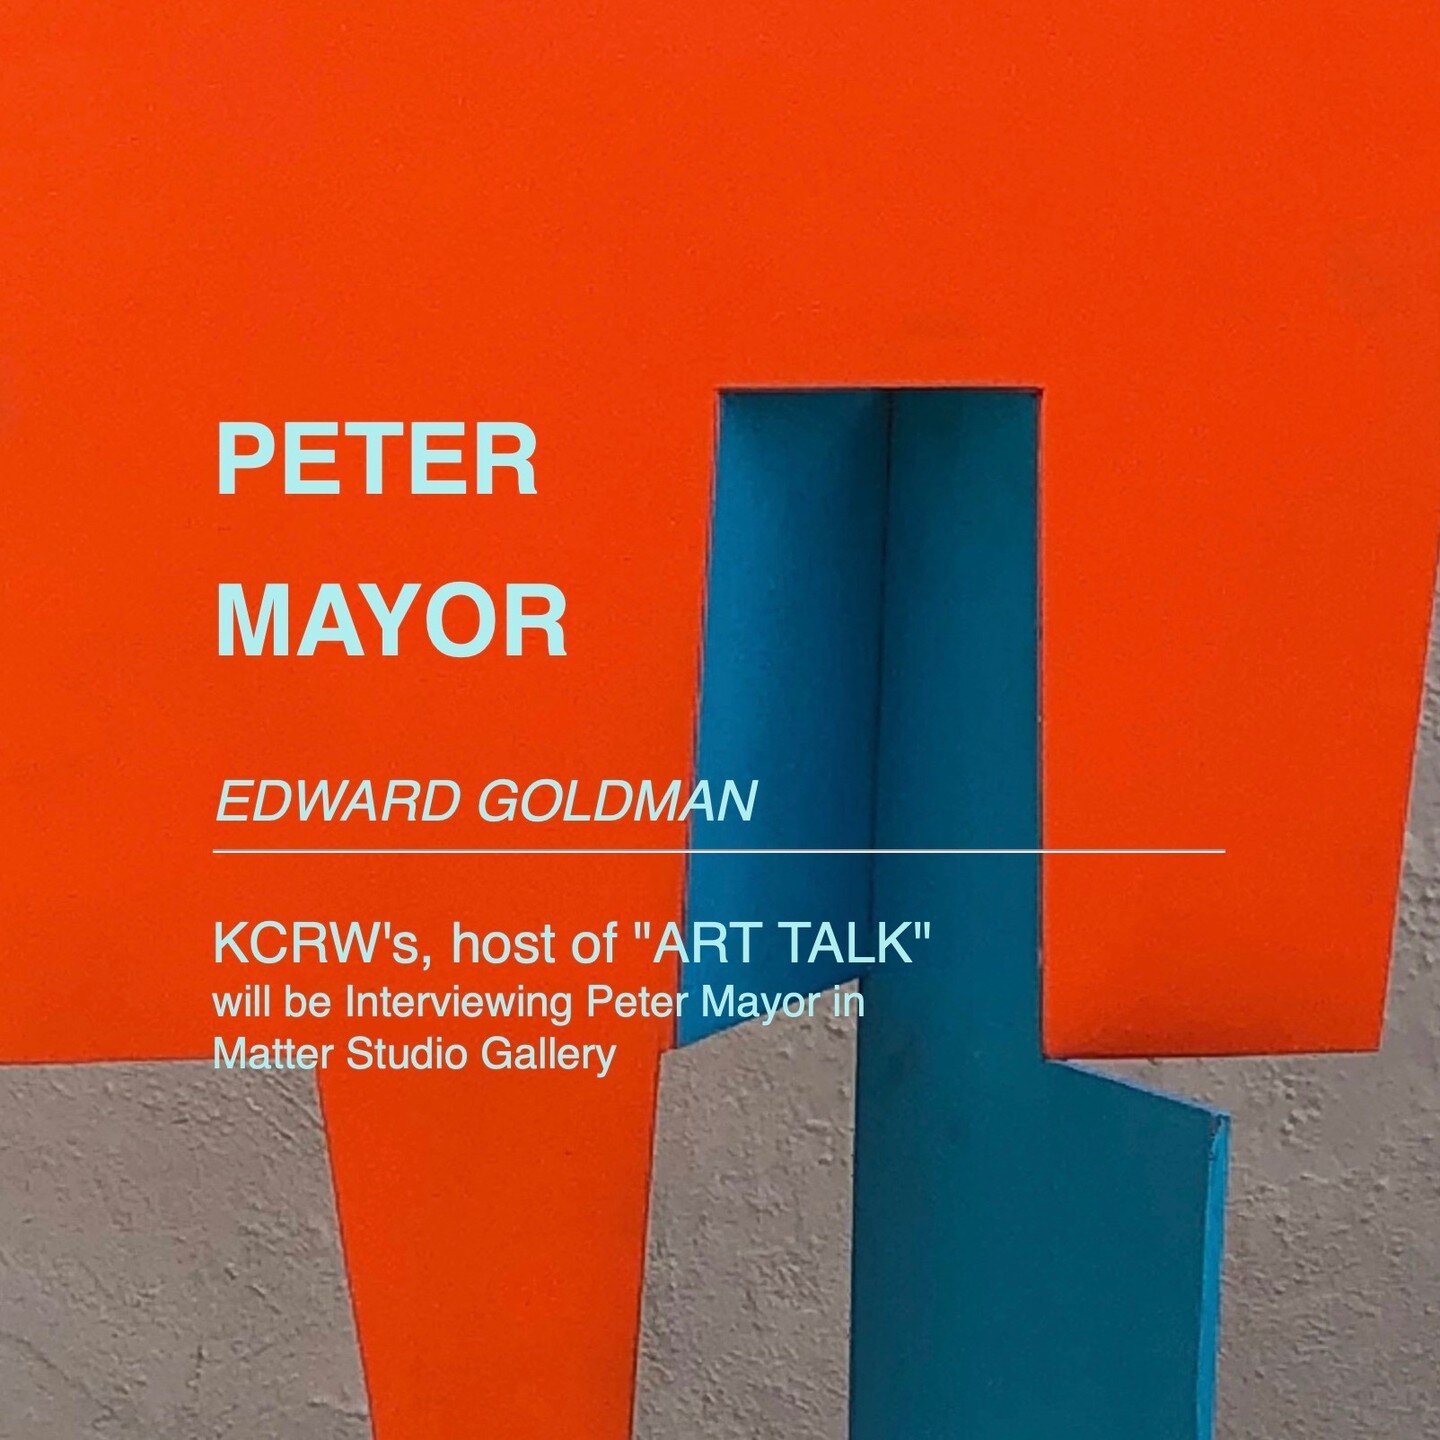 Hello my Smart Art Friends! Happy Wednesday!

On this Saturday, April 7th, Matter Studio Gallery will host an artist talk with yours truly and Peter Mayor, to discuss Peter&rsquo;s creative process and his exhibition &ldquo;A Matter Of Form&rdquo;, c